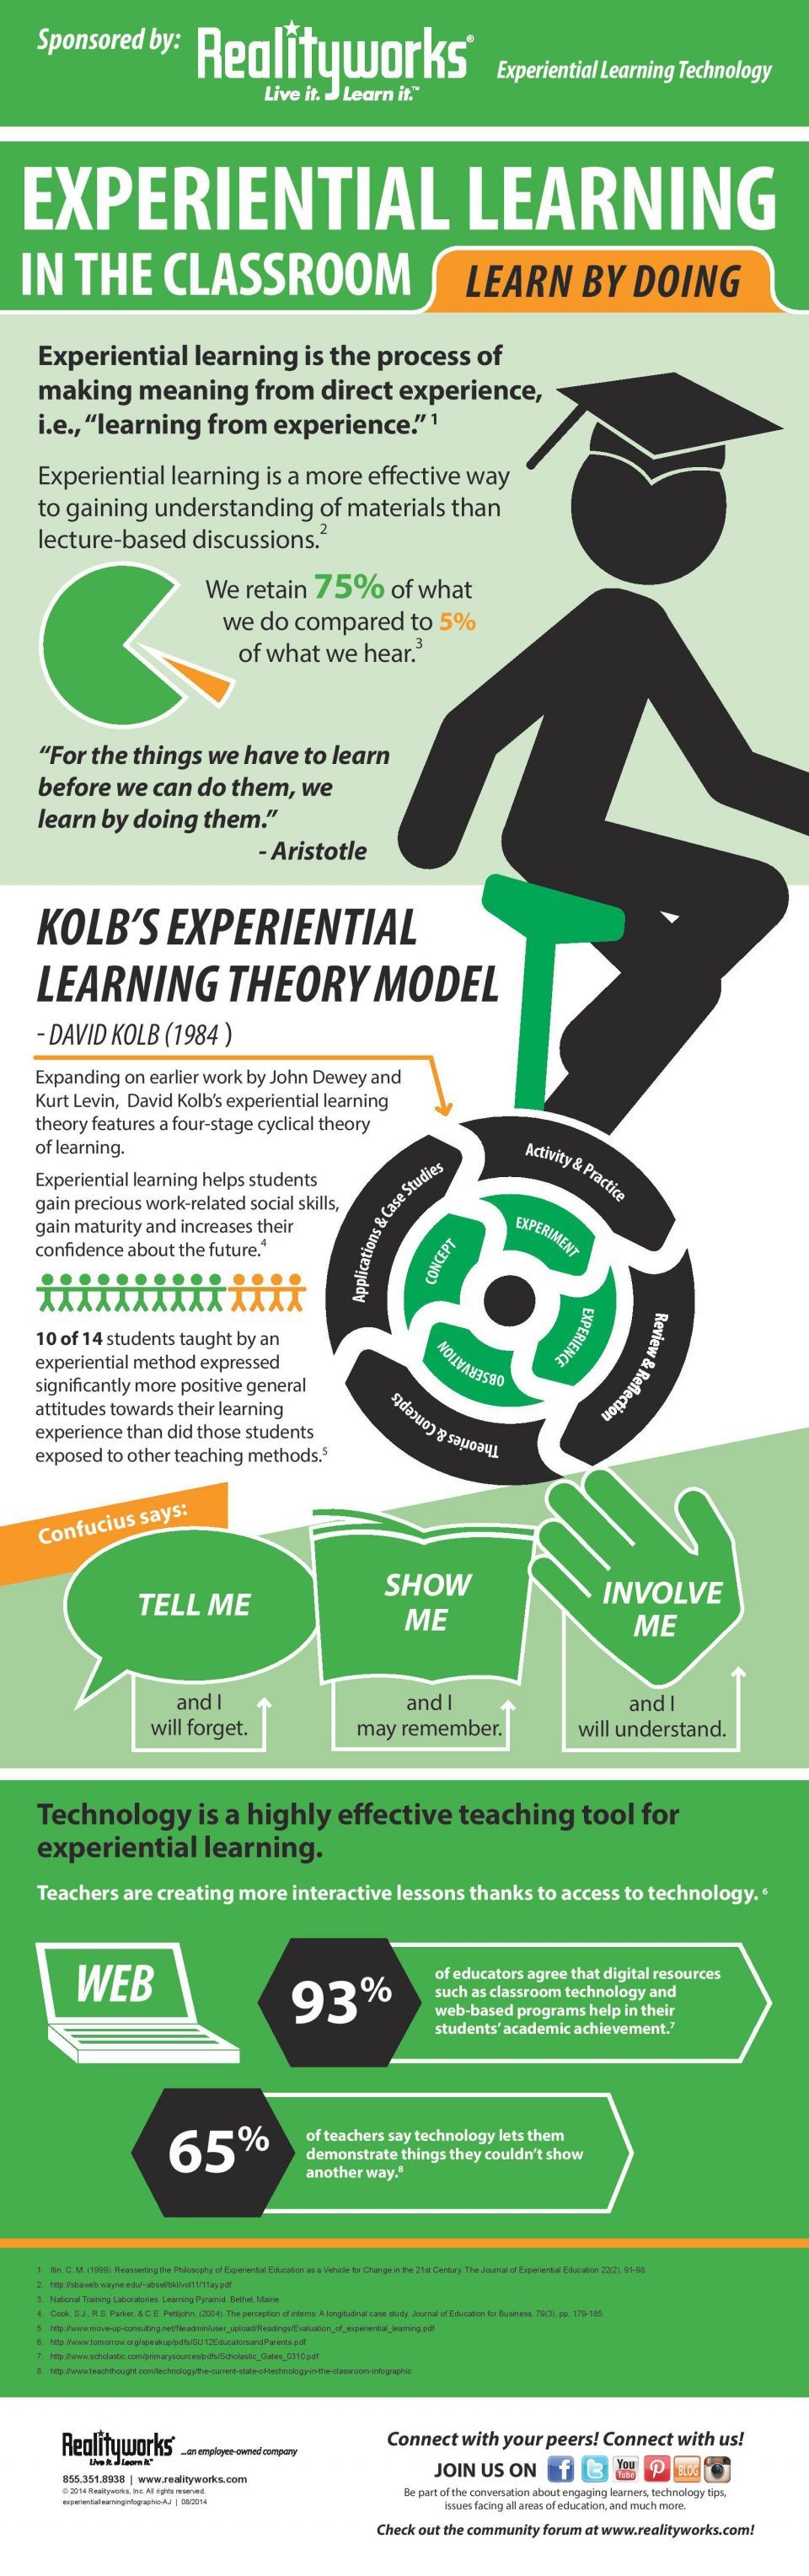 Experiential Learning in The Classroom Infographic